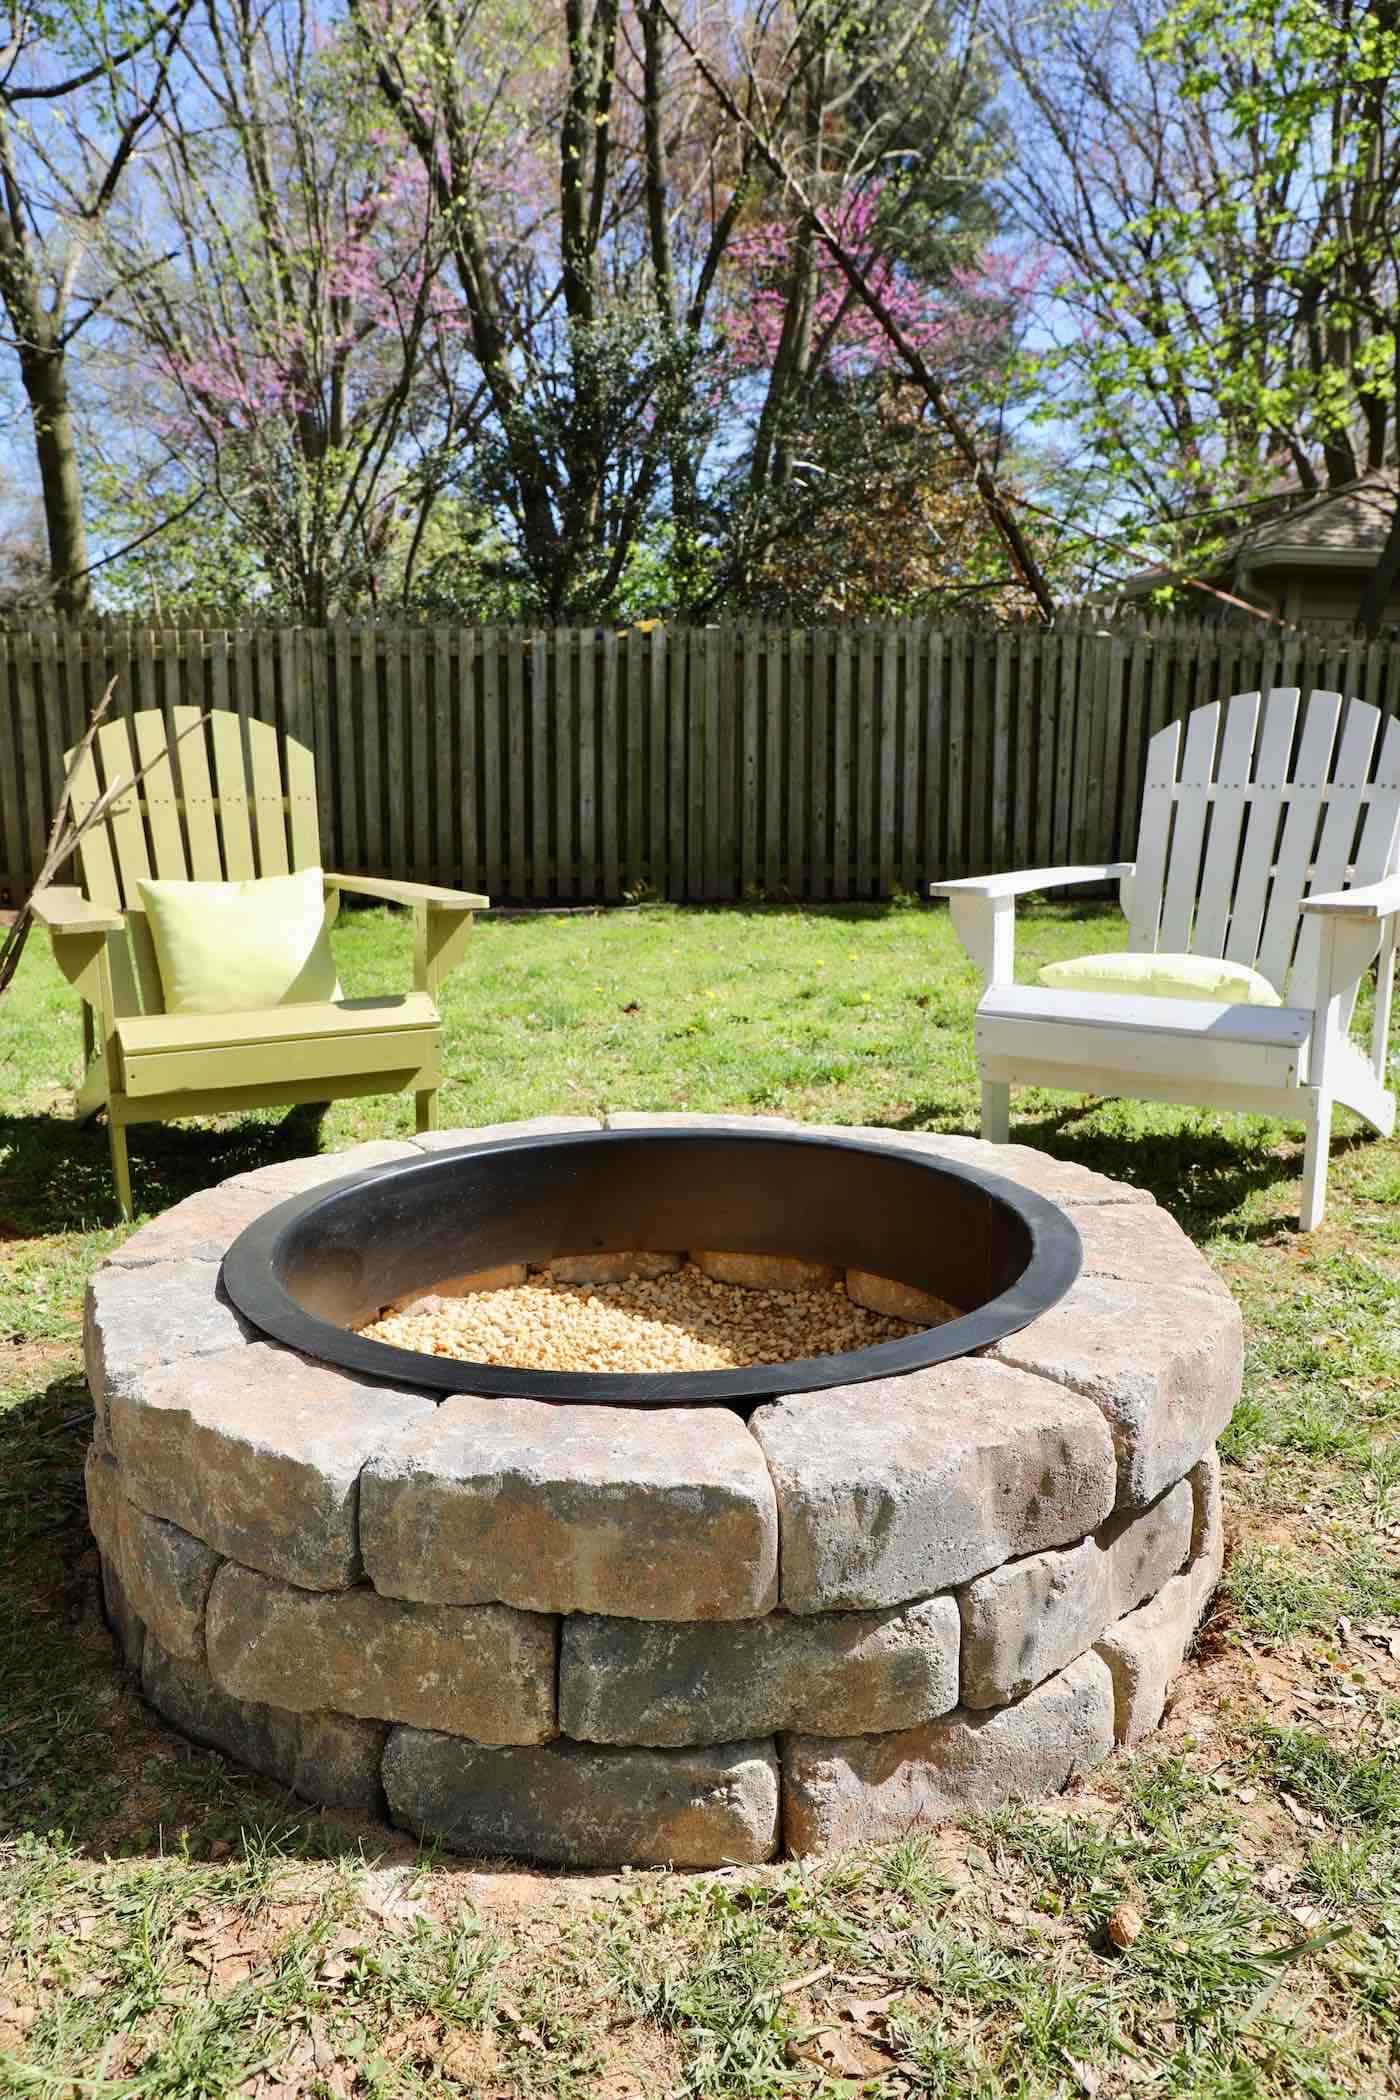 Diy Fire Pit With Gravel Stones, How To Build A Stone Fire Pit